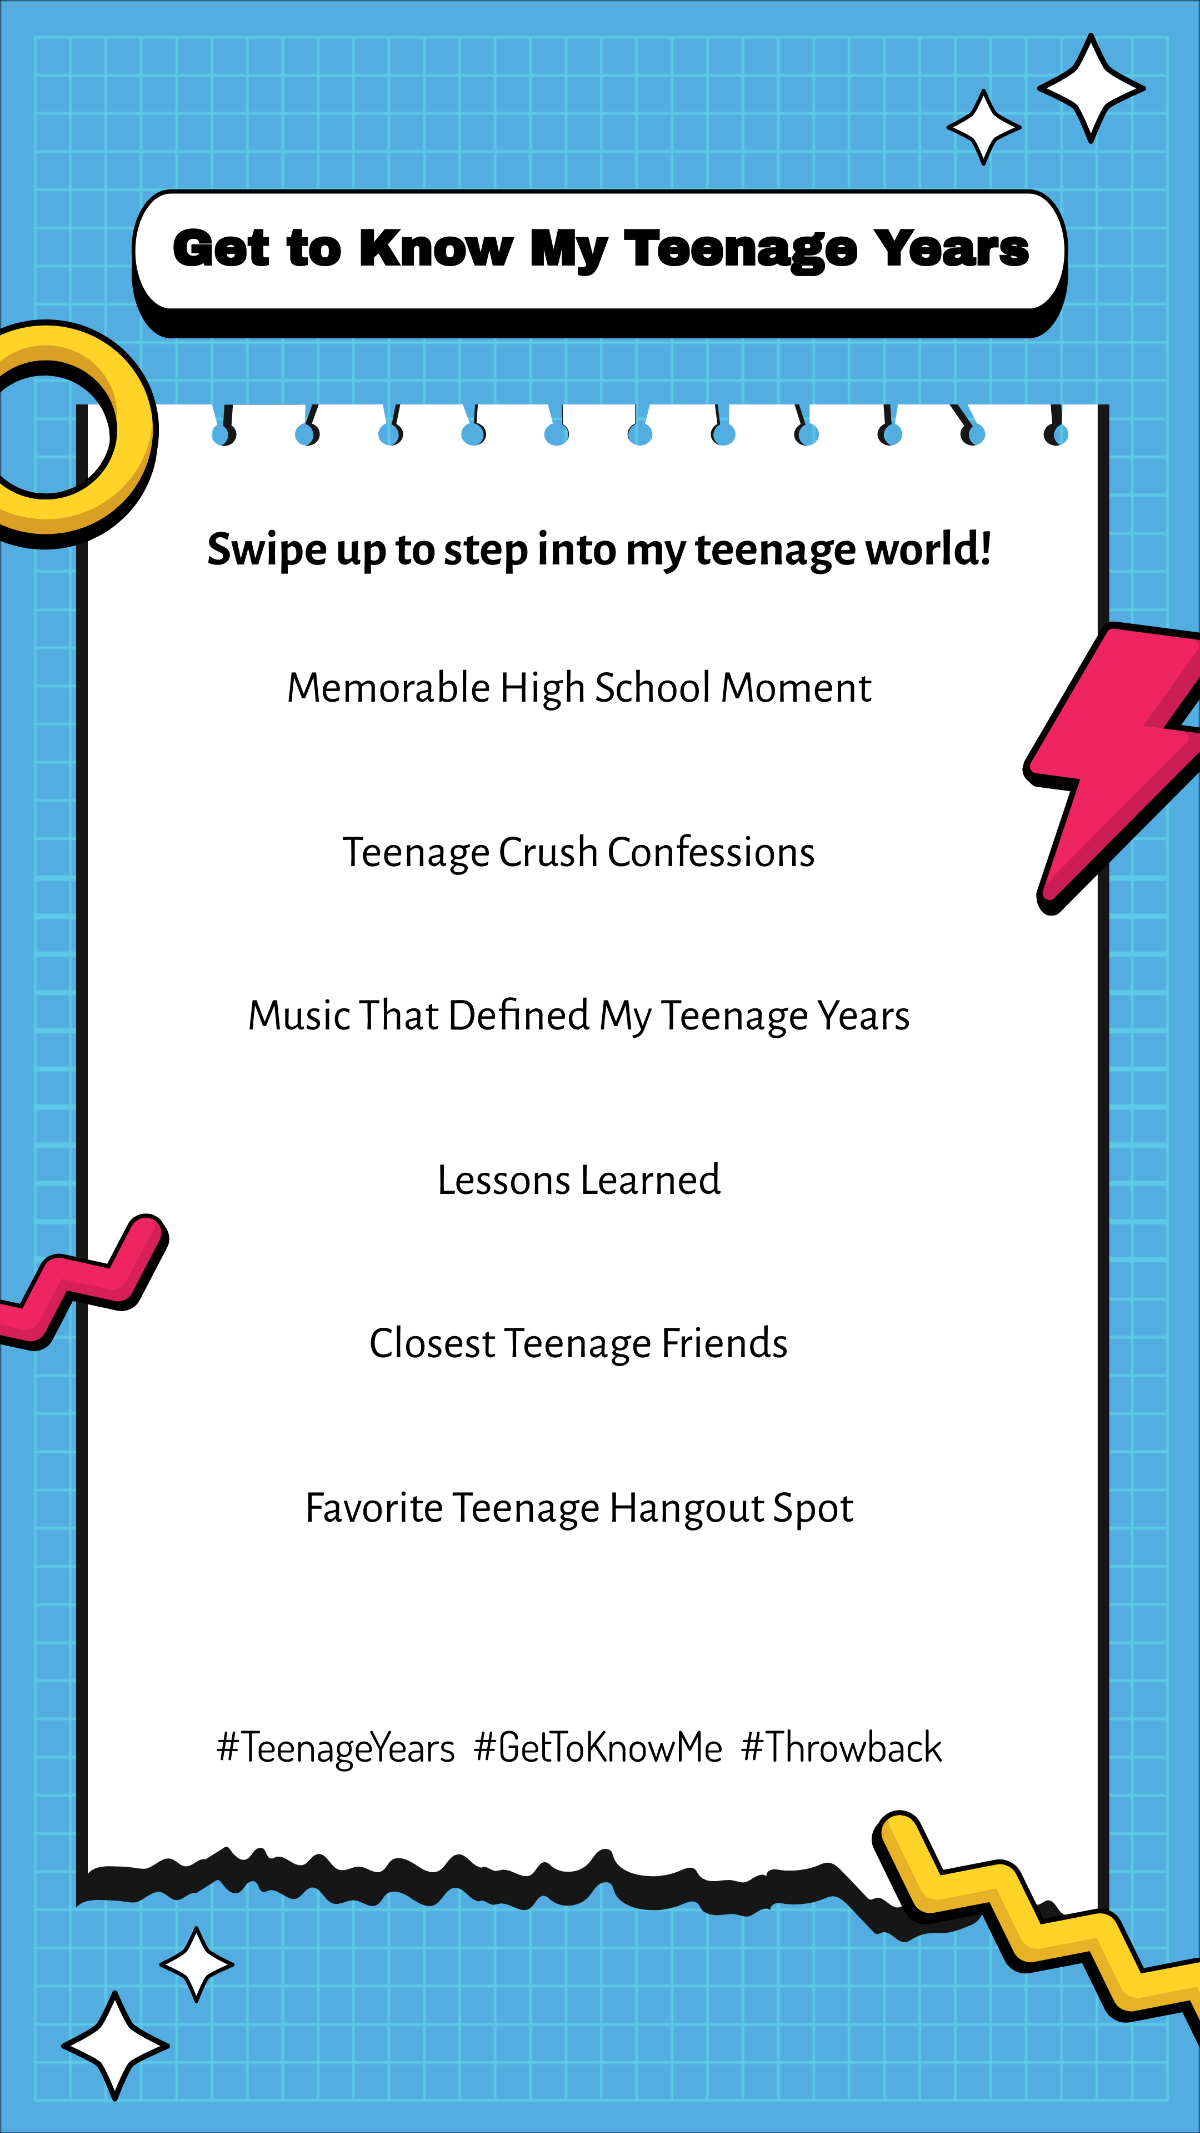 Get to Know My Teenage Years Post